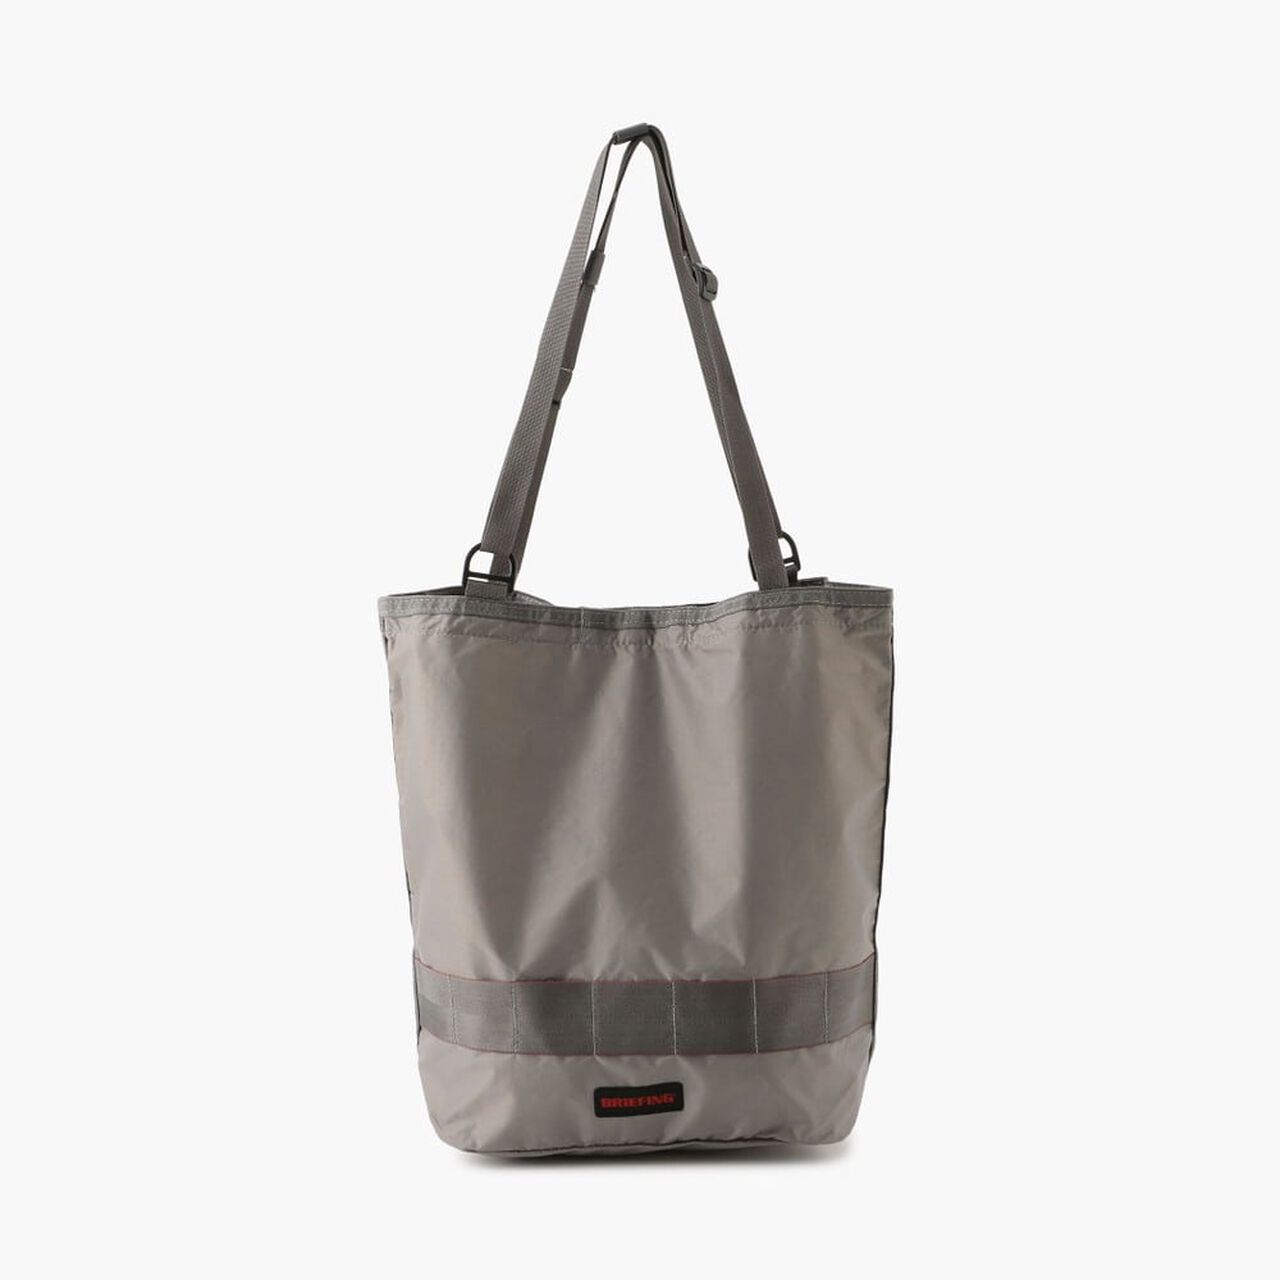 2WAY TOTE SL PACKABLE SM,Gray, large image number 1